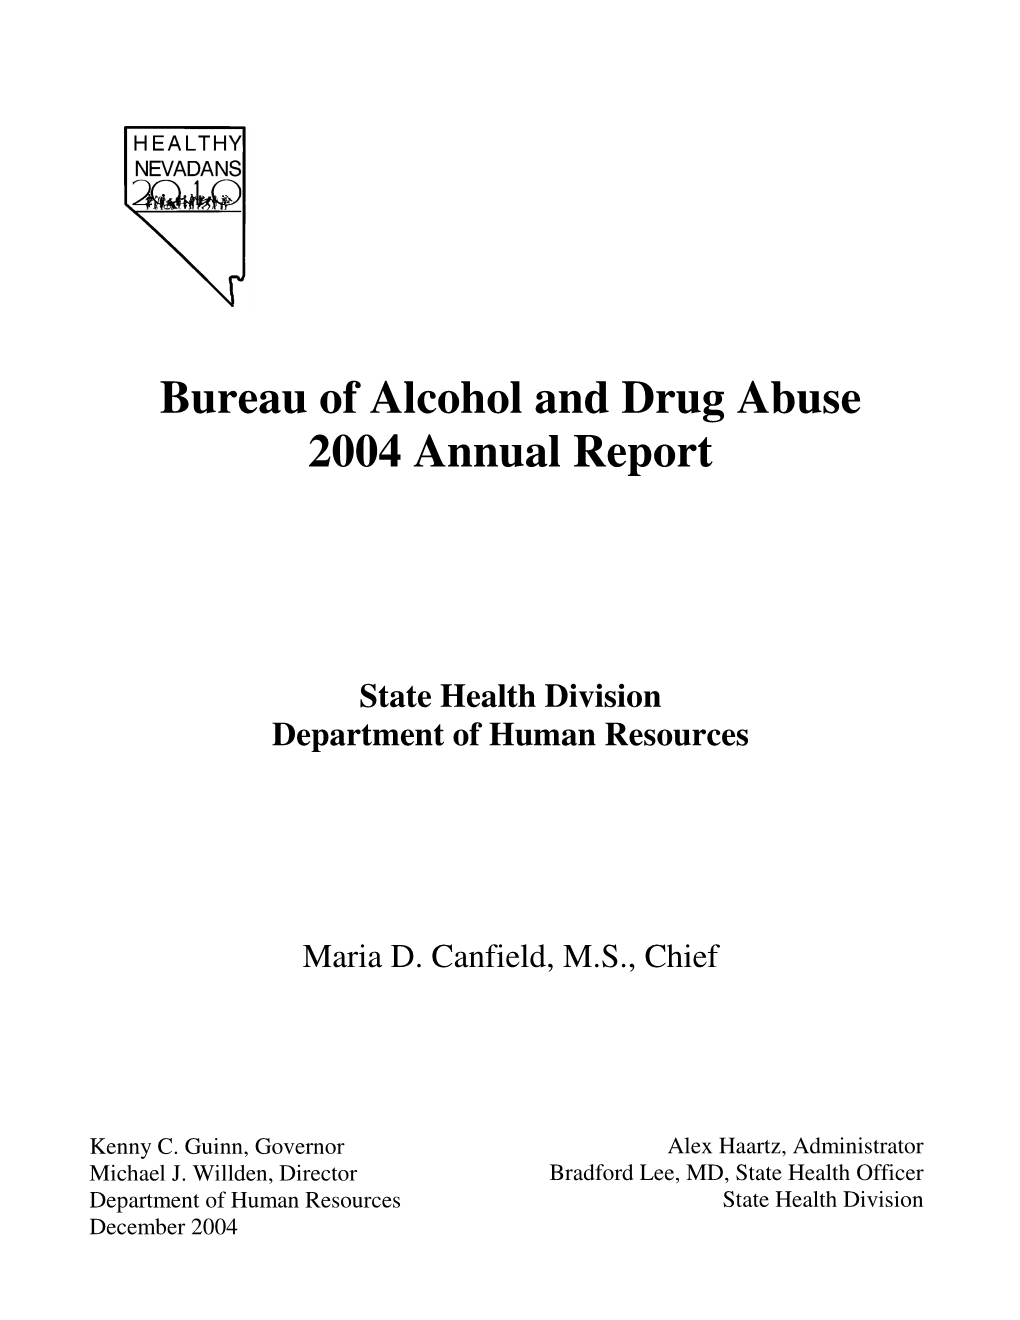 Bureau of Alcohol and Drug Abuse 2004 Annual Report